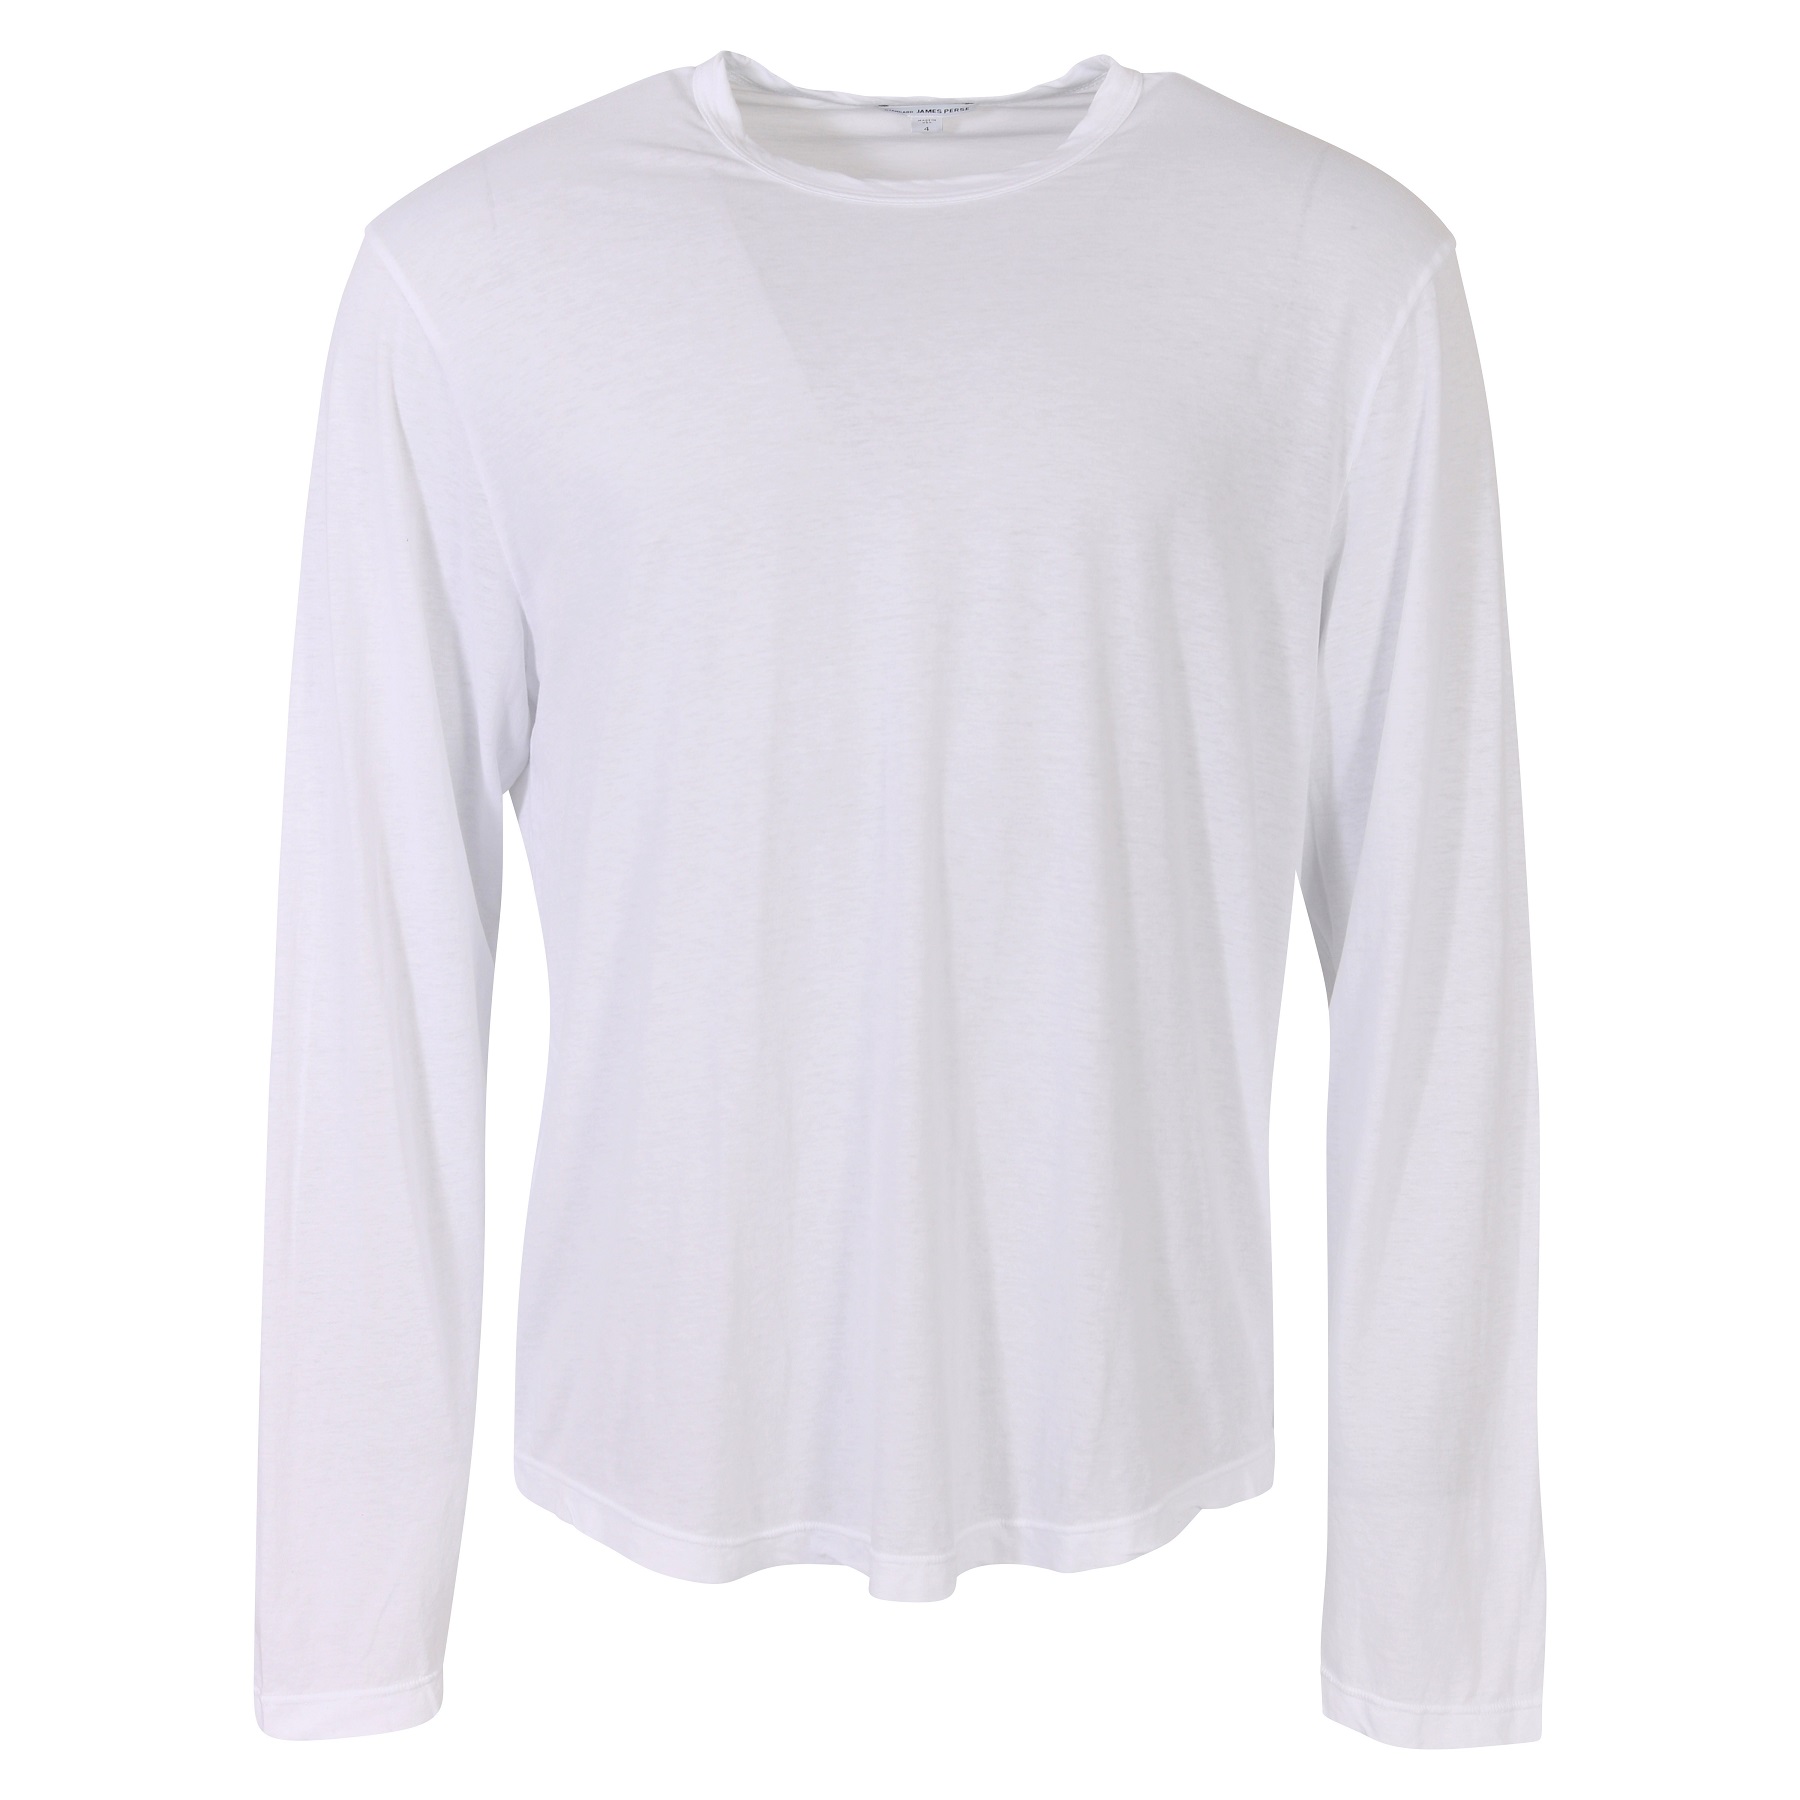 James Perse Clear Jersey Longsleeve Crewneck White S/1